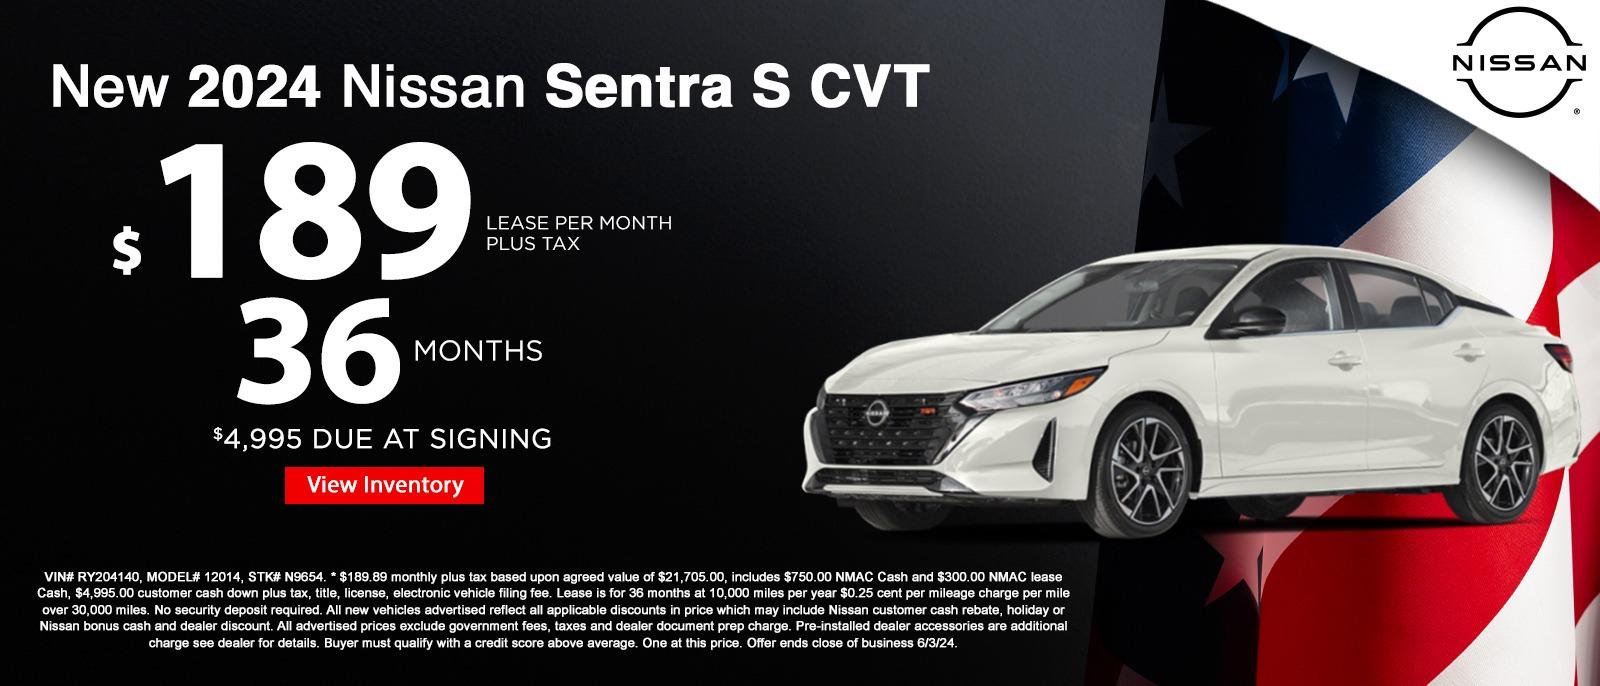 New 2024 Nissan Sentra S CVT
$189 lease per month plus tax
36 months
$4,995 due at signing